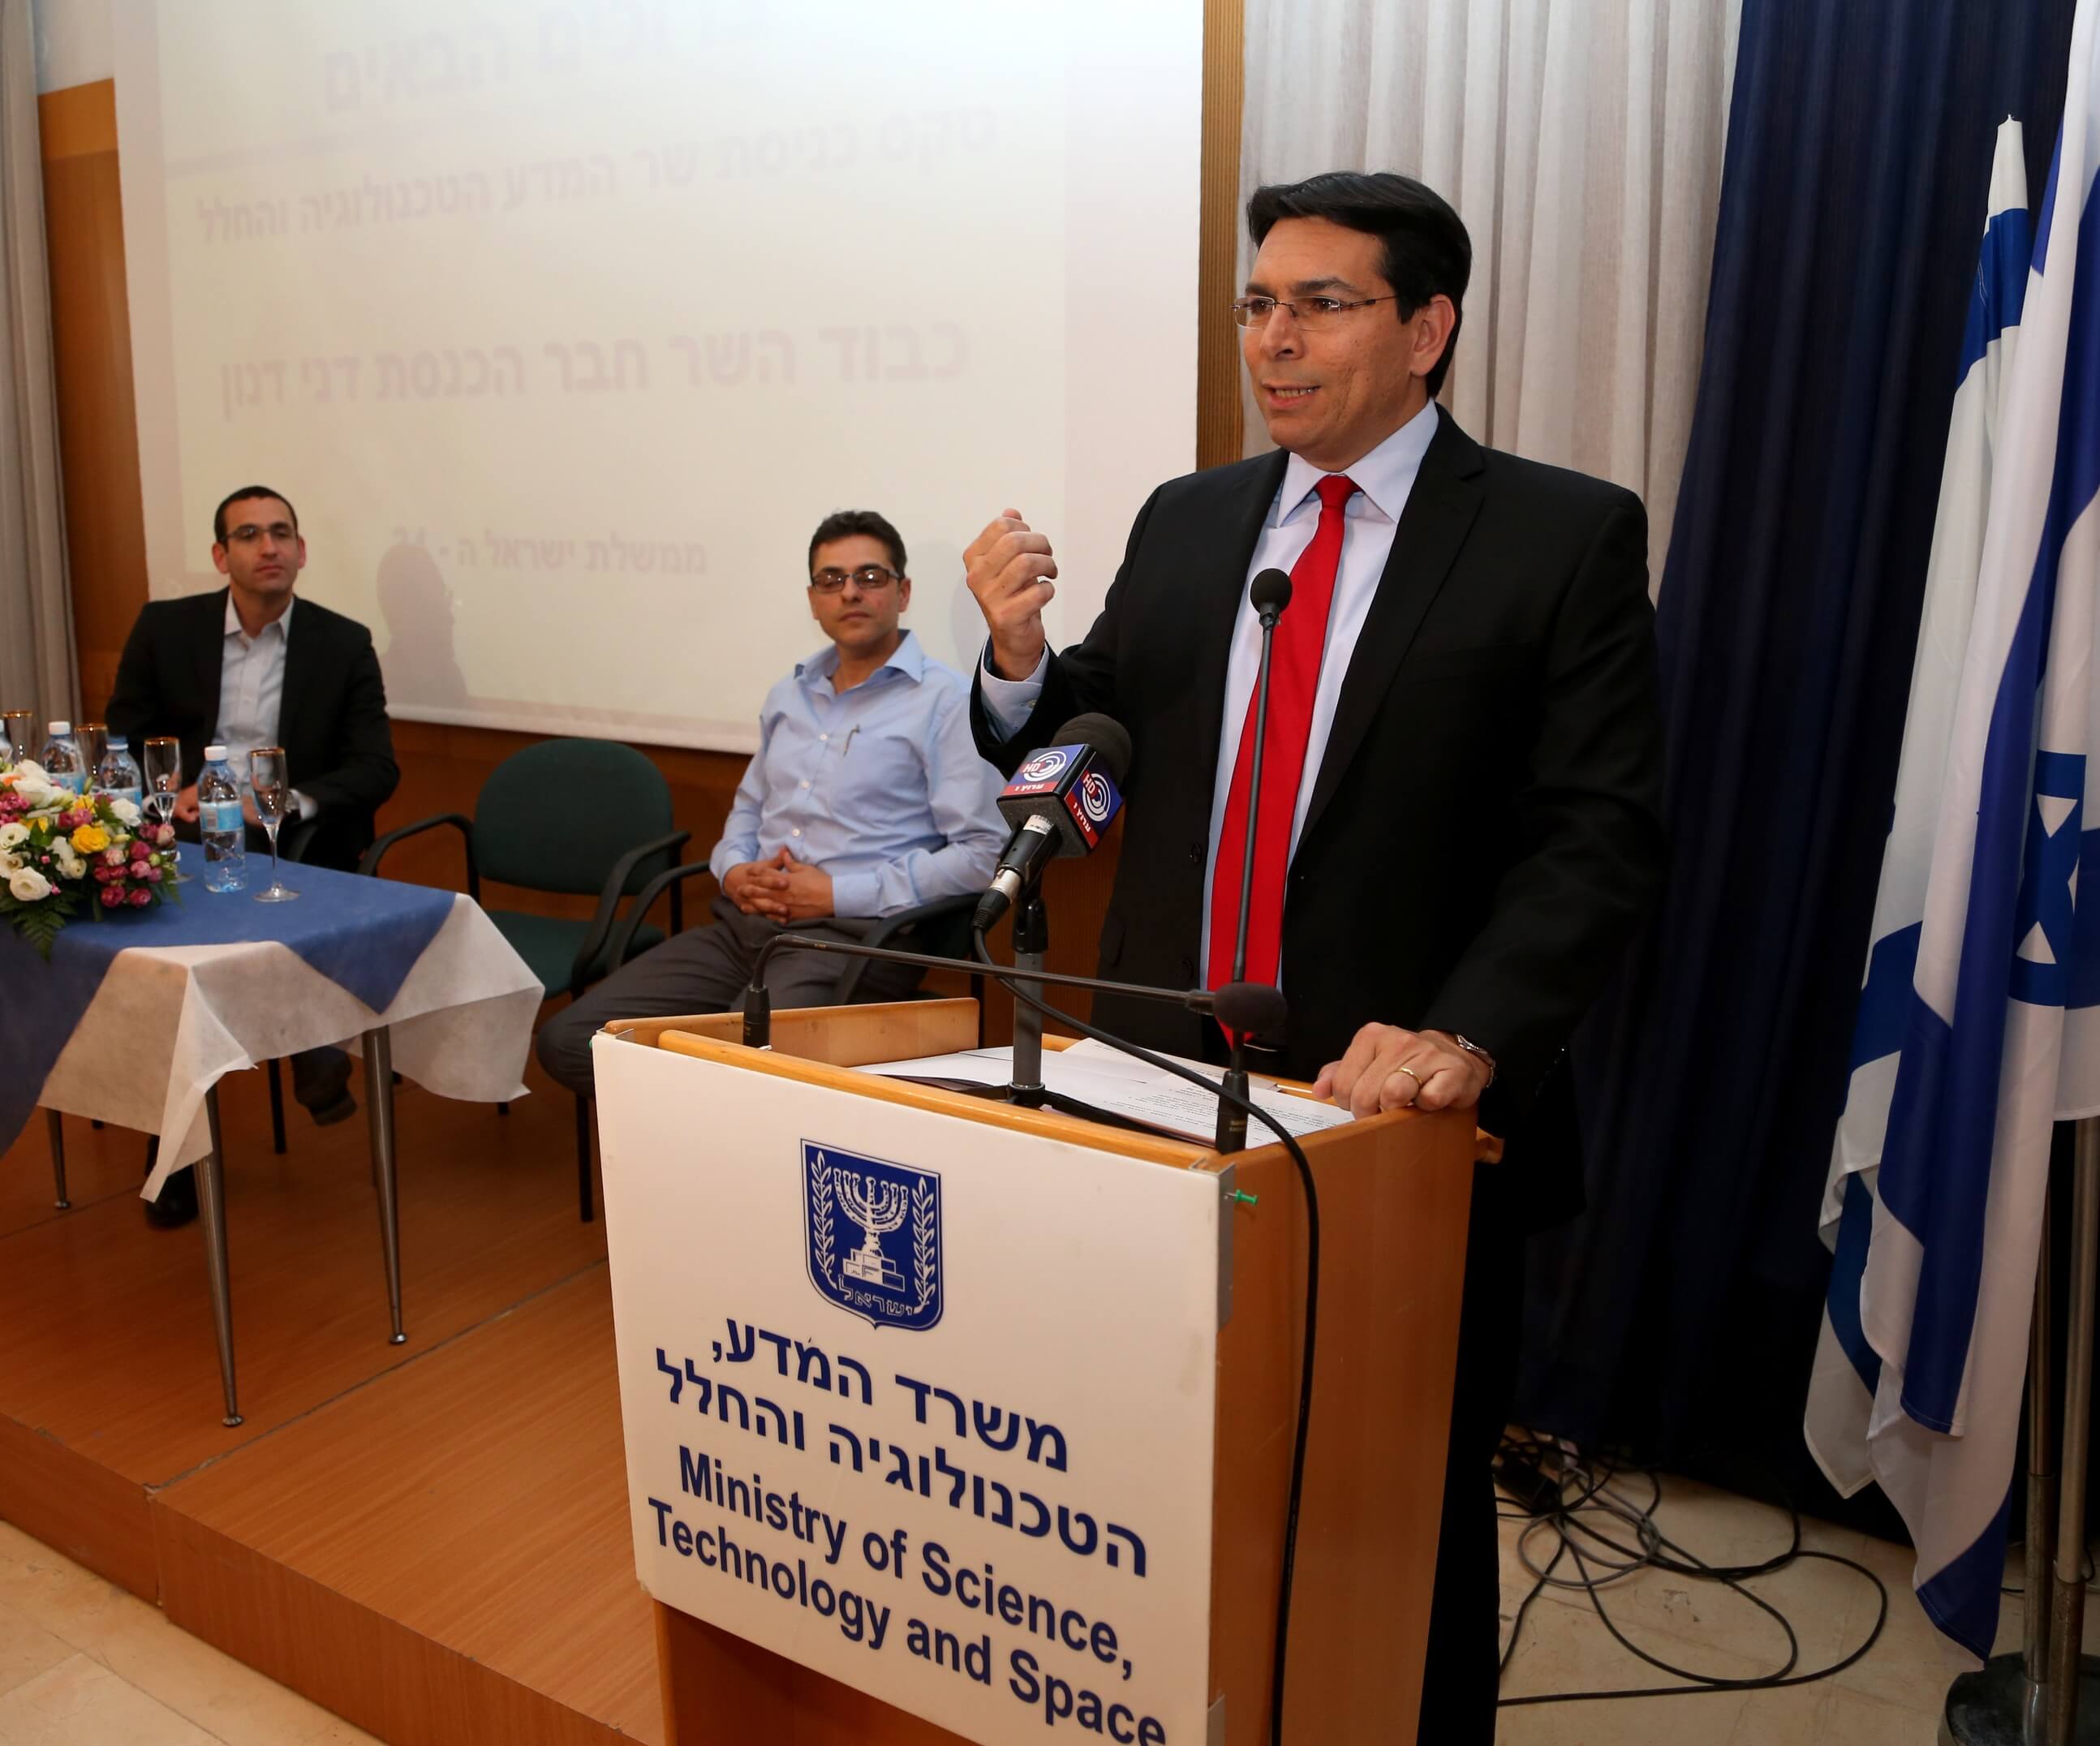 Minister of Science, Technology and Space Danny Danon upon taking office, 17/5/2015. Photo - Spokesperson of the Ministry